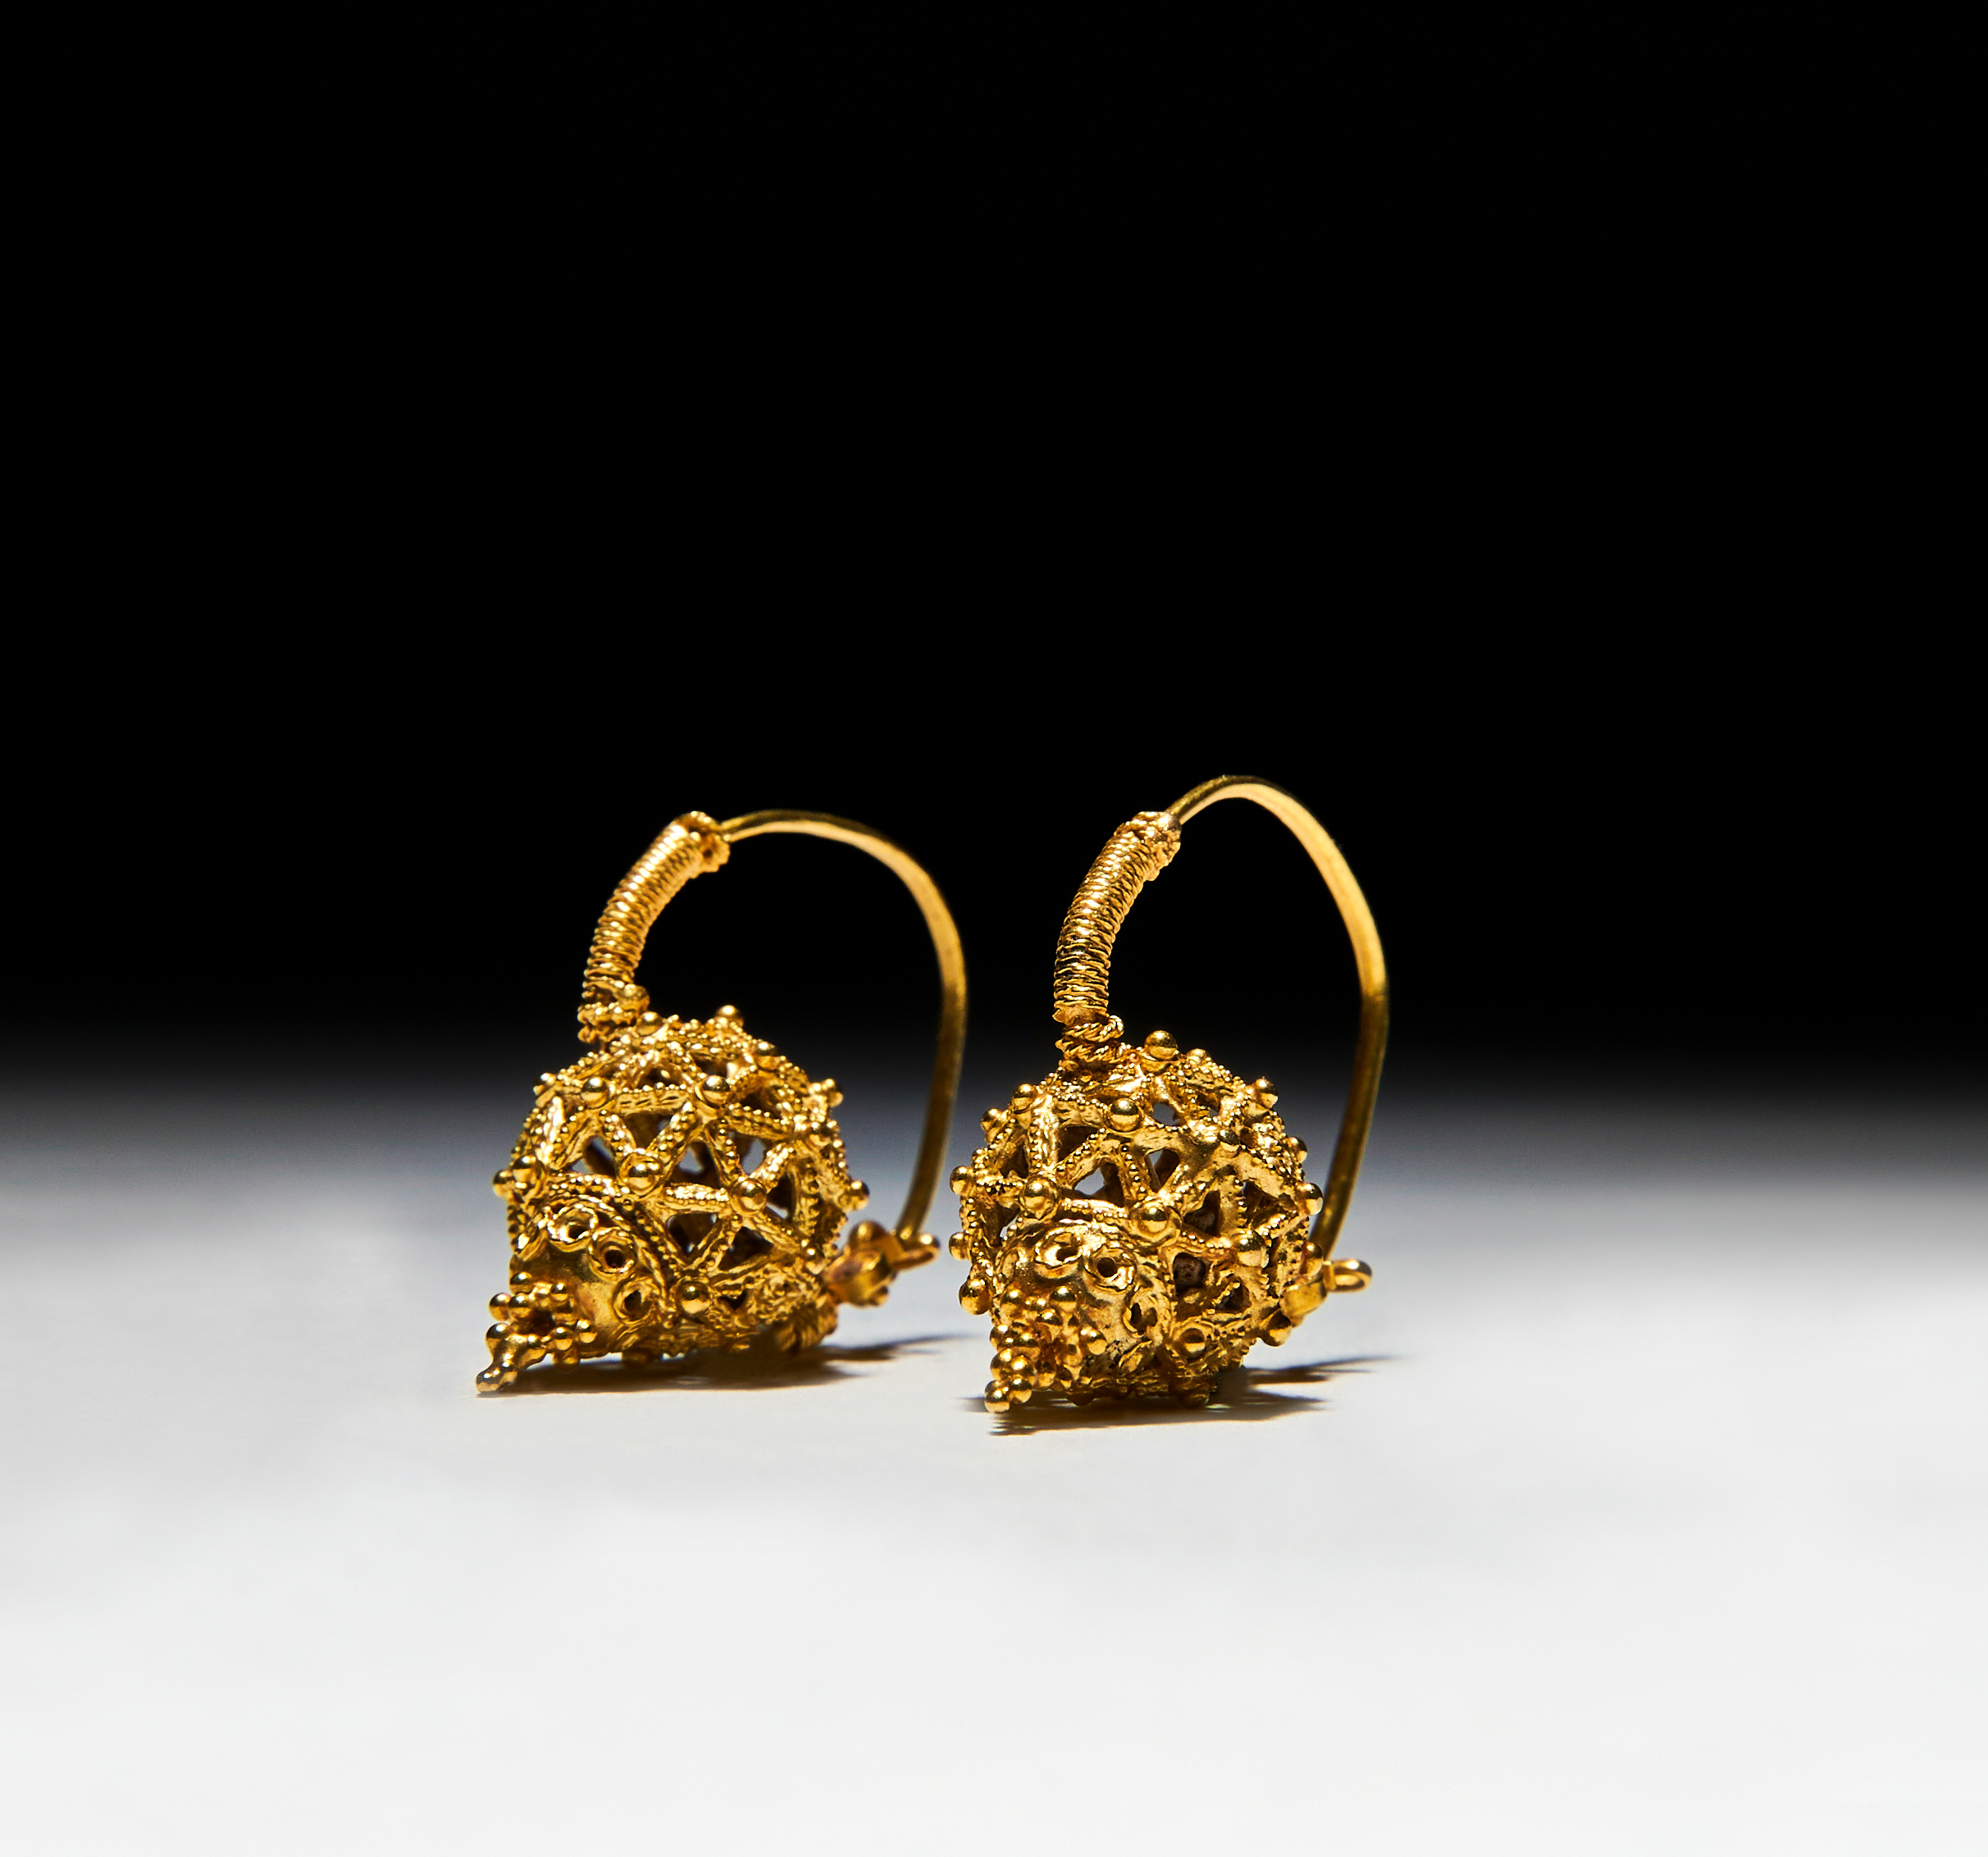 A PAIR OF FATIMID GOLD EARRINGS, CIRCA 11TH CENTURY, EGYPT